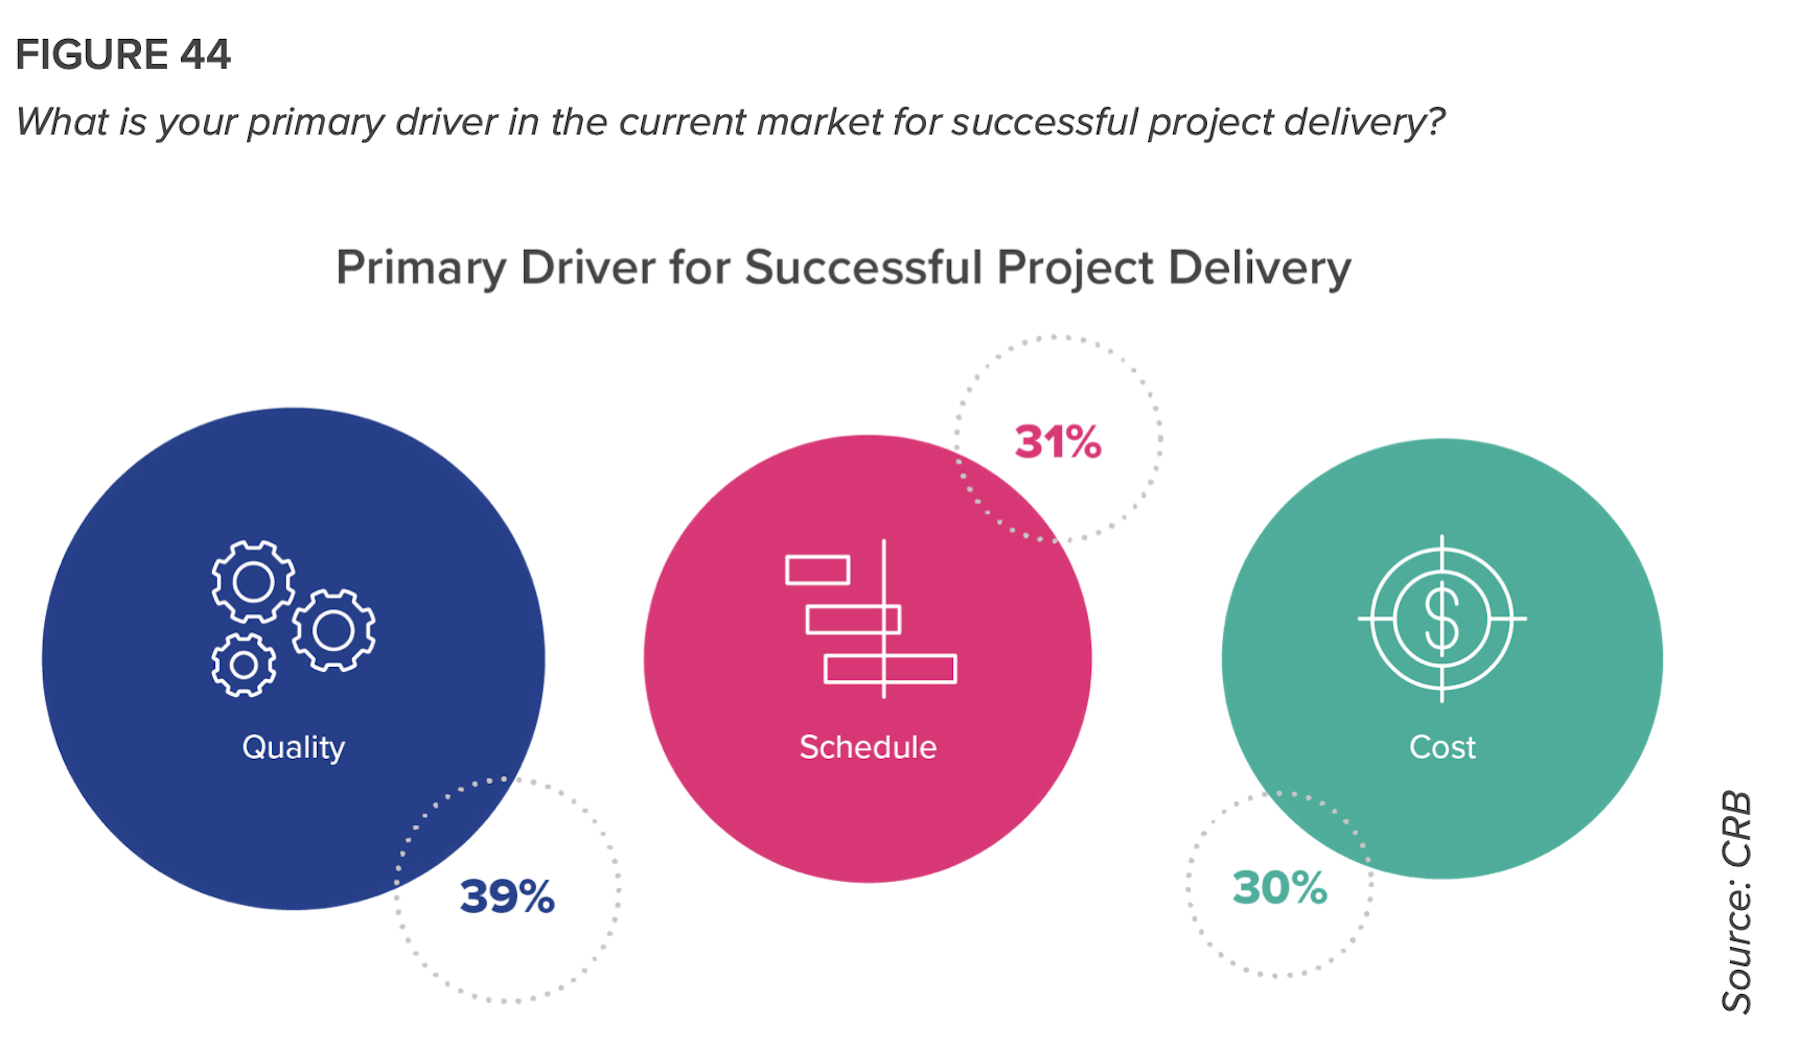 Quality, scheduling and cost drive project delivery decisions